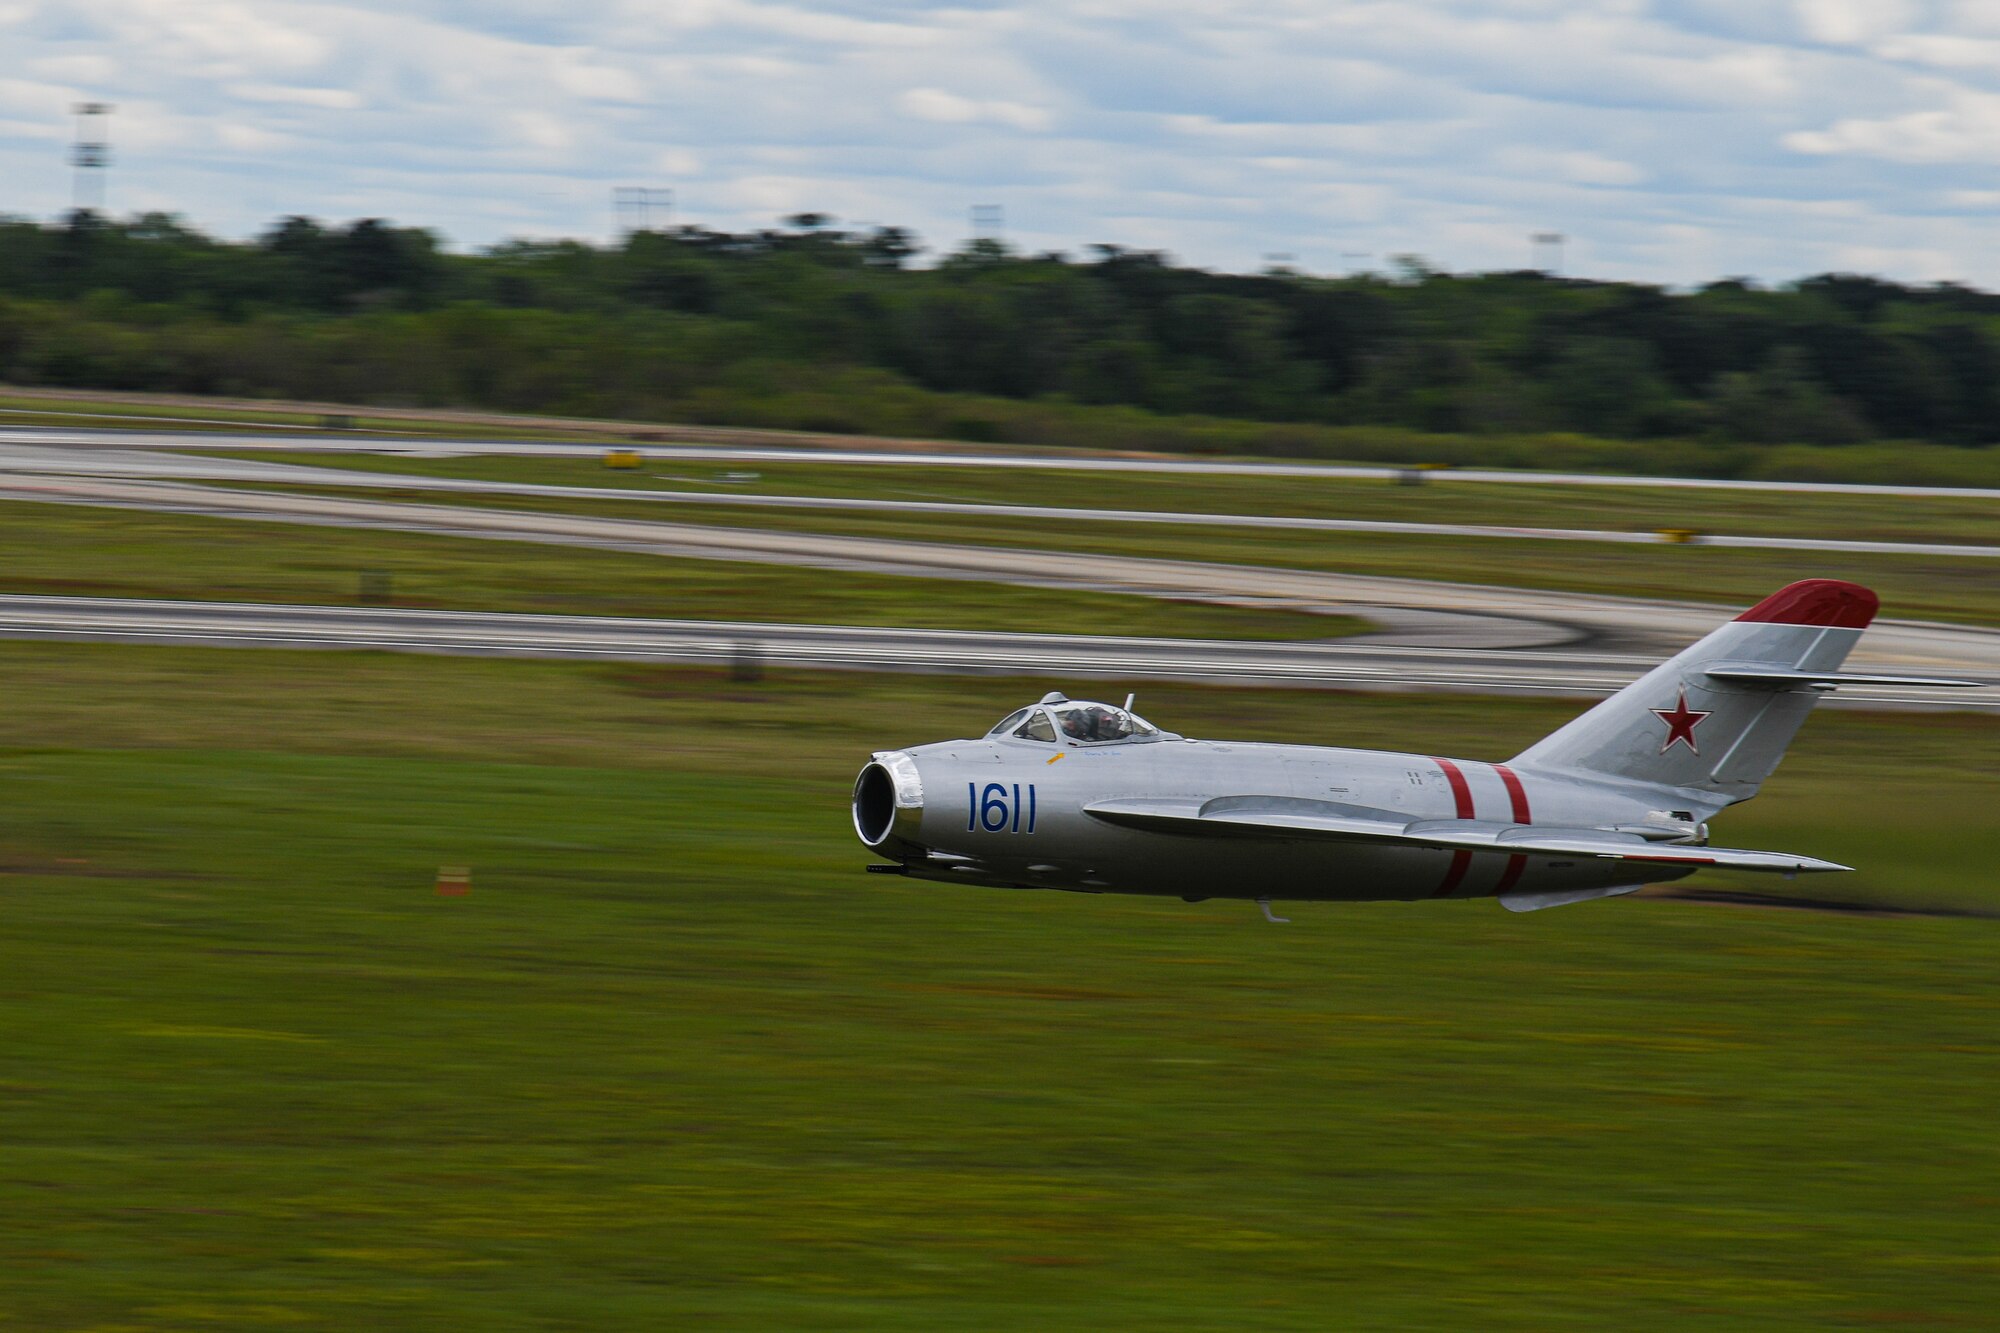 The de Havilland-115 Vampire performs at the Titans of Flight Air Expo, Joint Base Charleston, South Carolina, April 9, 2022. The airshow pays tribute to air power from the earliest U.S. military inventory to modern day aircraft. (U.S. Air Force photo by Senior Airman Jade Dubiel)